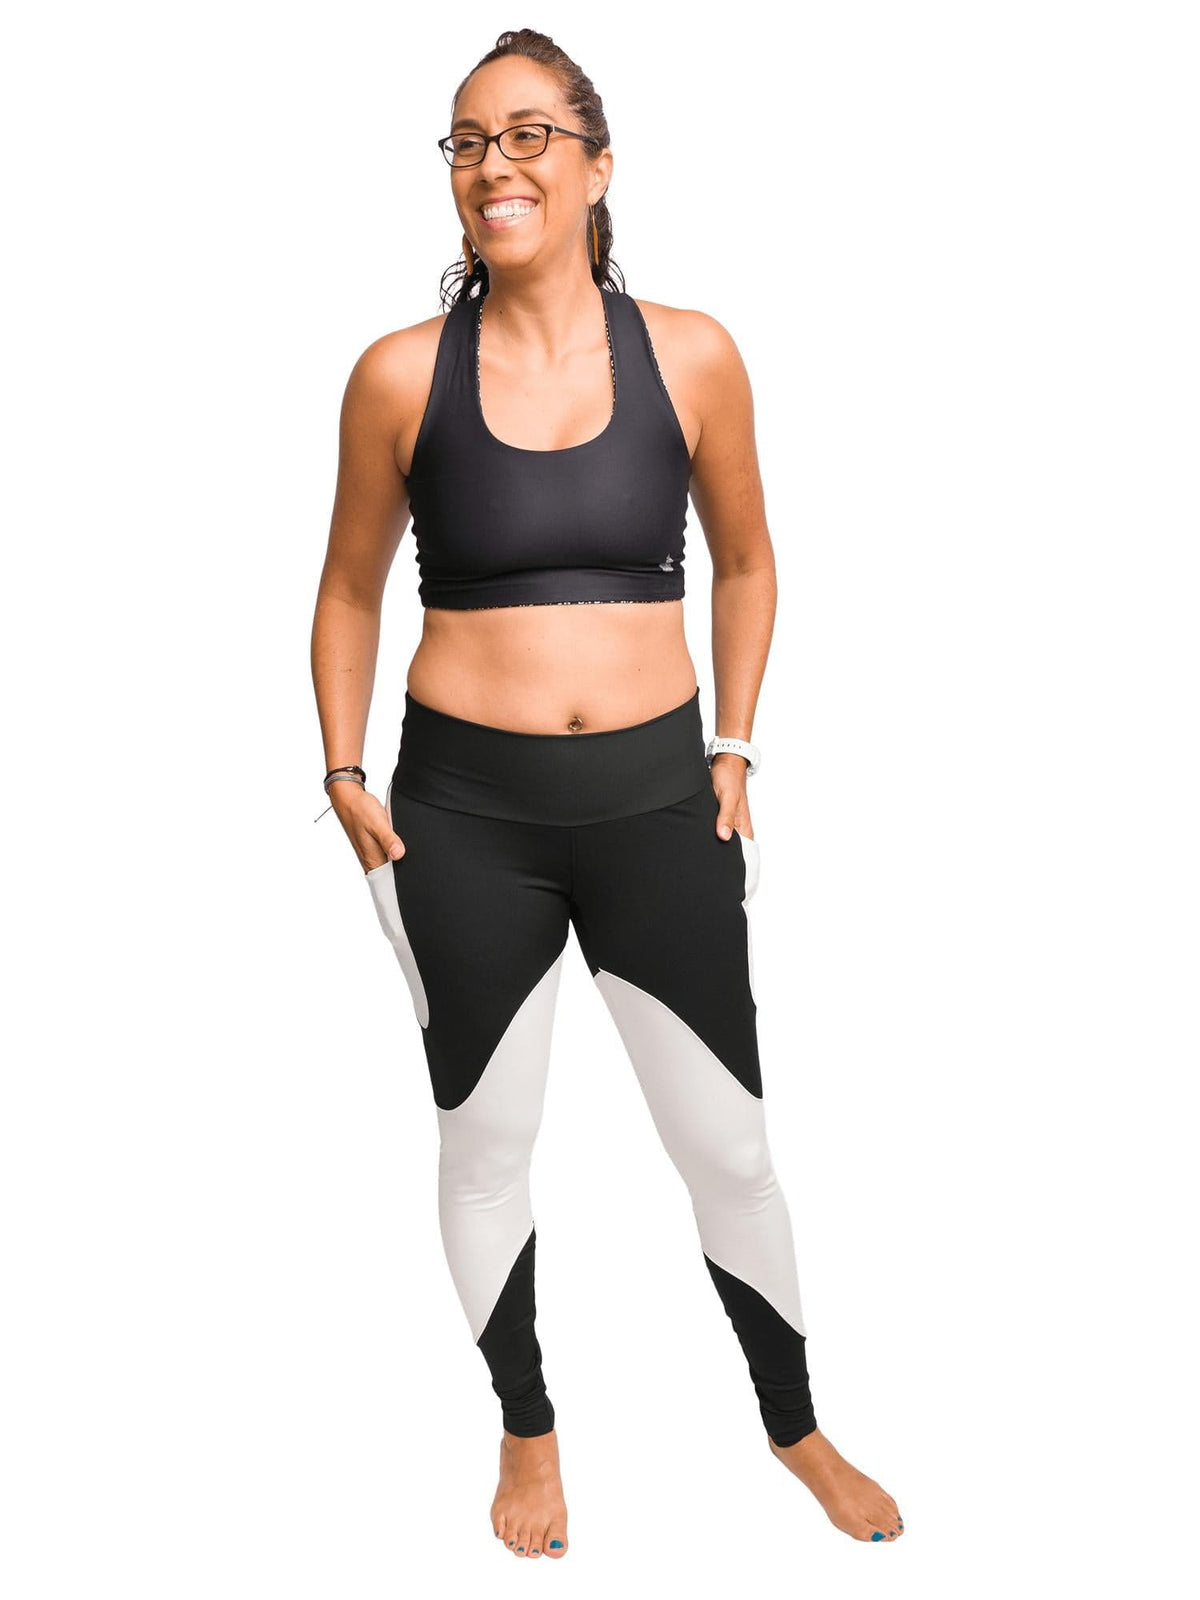 Model: Ana is an avid scuba diver, as well as mooring buoy volunteer for Biscayne National Park. She is 5&#39;9&quot;, 170 lbs, 36B and is wearing a L legging and M spotted eagle ray top (reverse side).